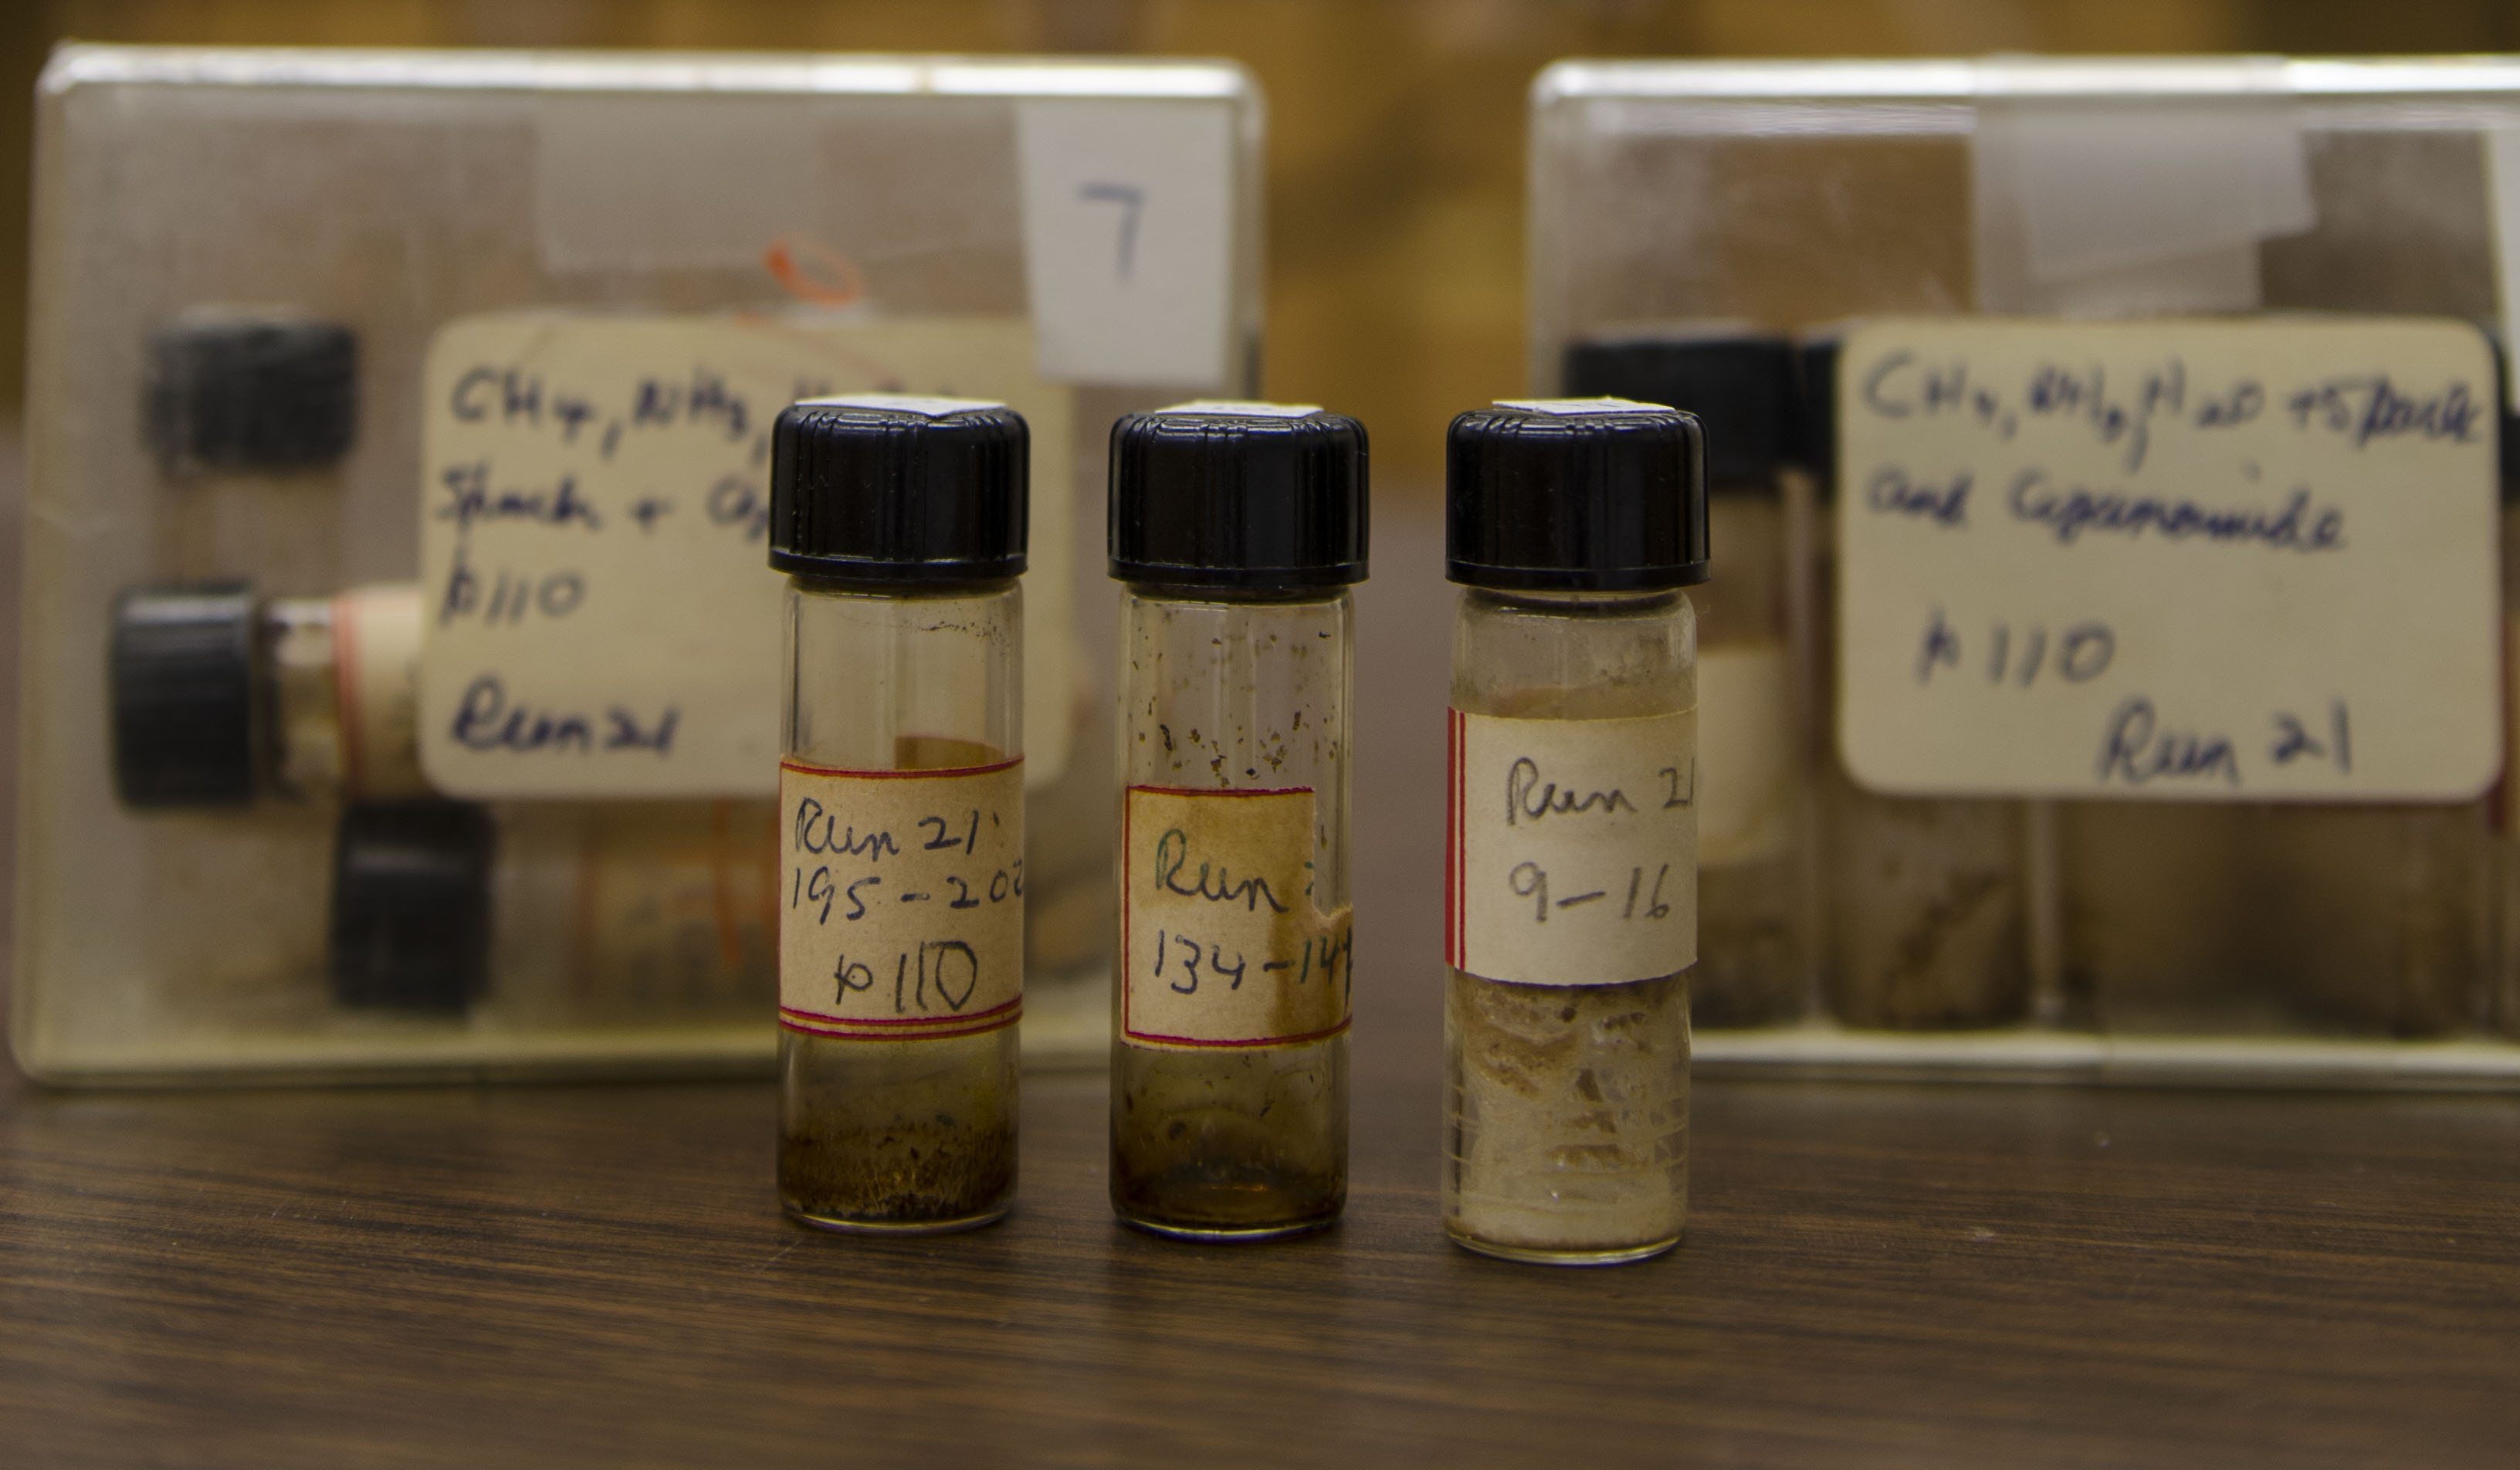 Vials contain samples of prebiotic materials created by Stanley Miller in 1958, labeled by Miller himself. Miller added a potential prebiotic condensation agent, cyanamide, during the course of the experiment. Cyanamide has been suggested to induce polymerization of amino acids into simple peptides which is an important set in chemical evolution and possibly the origin of life. For unknown reasons, Miller had never analyzed the samples. In a paper published in 2014, researchers at Georgia Tech and Scripps I